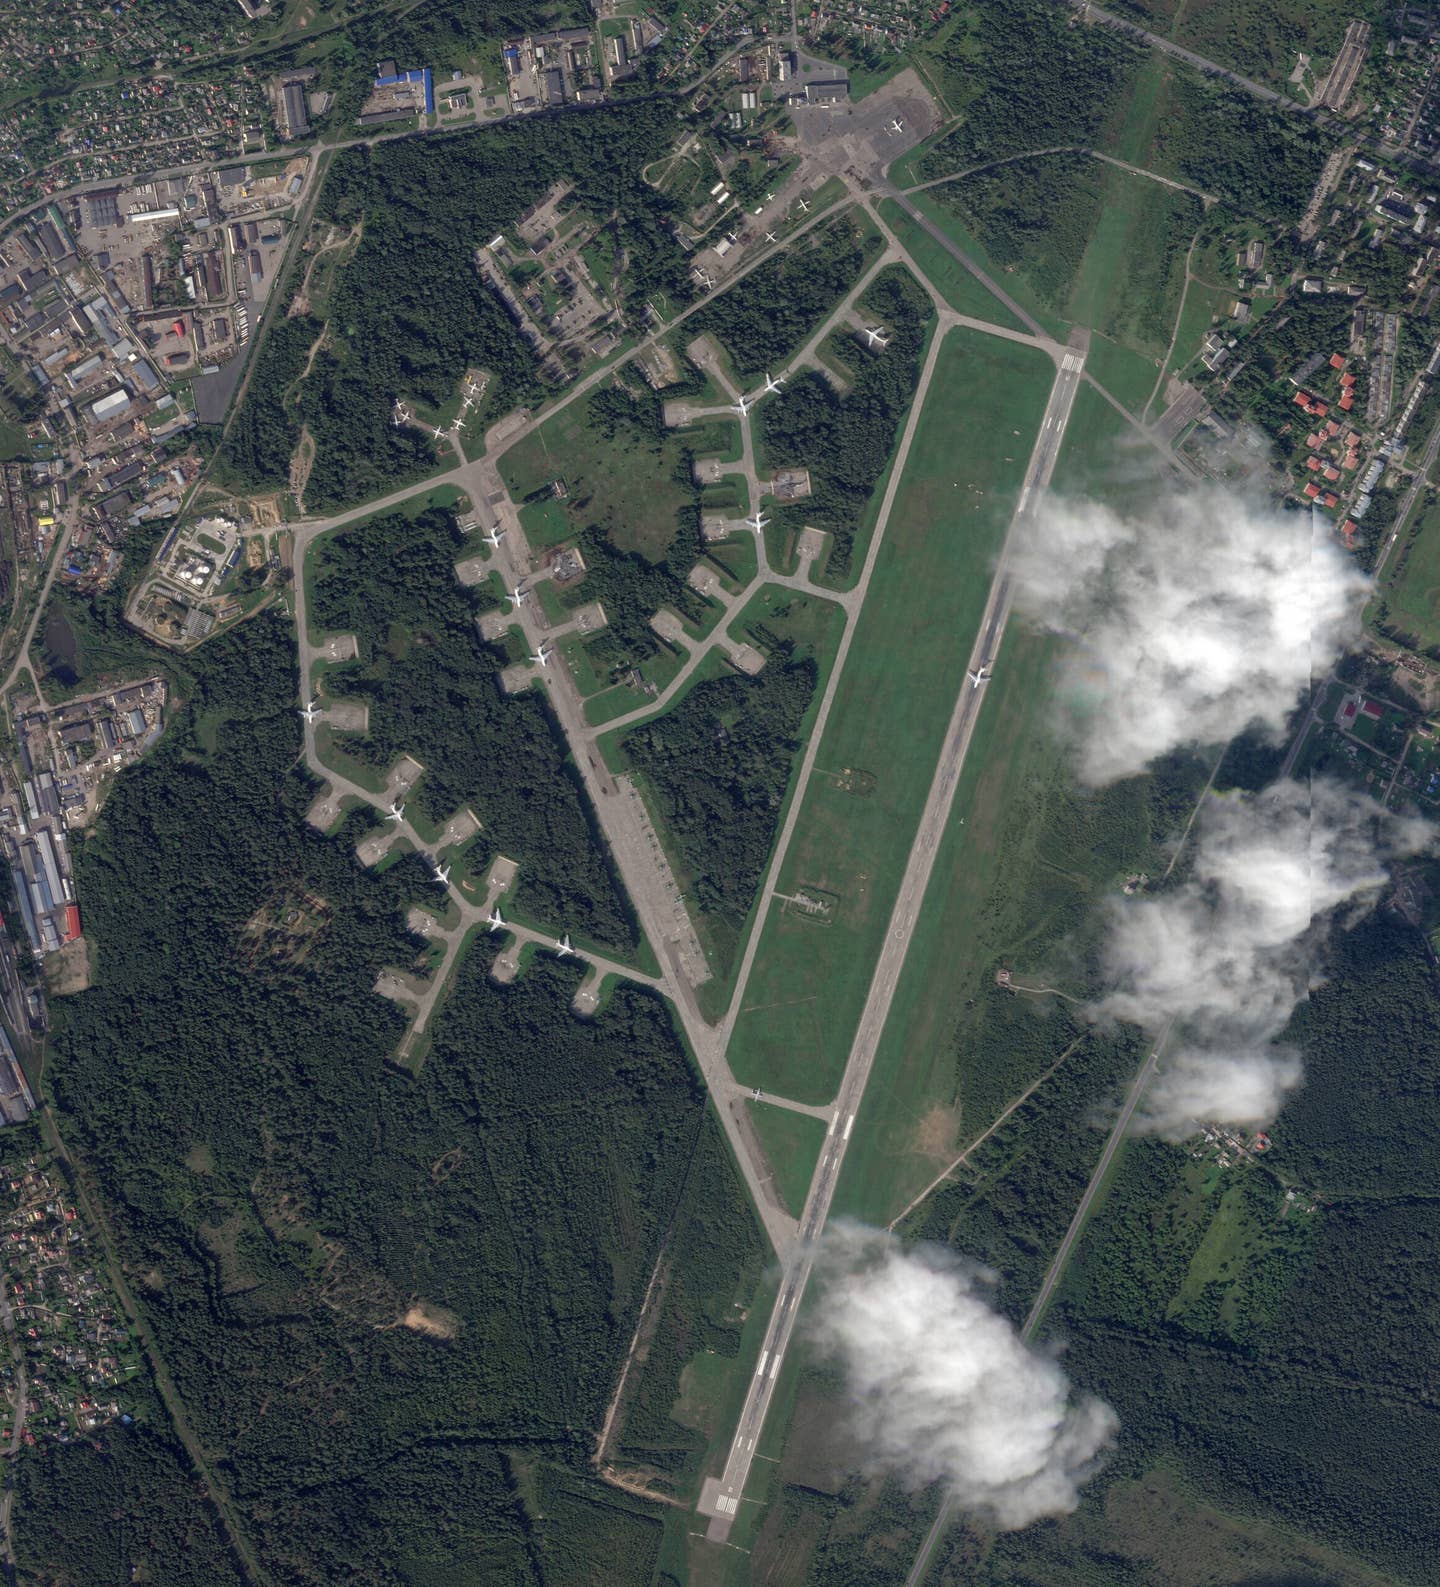 Kresty Air Base. <em>PHOTO © 2023 PLANET LABS INC. ALL RIGHTS RESERVED. REPRINTED BY PERMISSION</em>